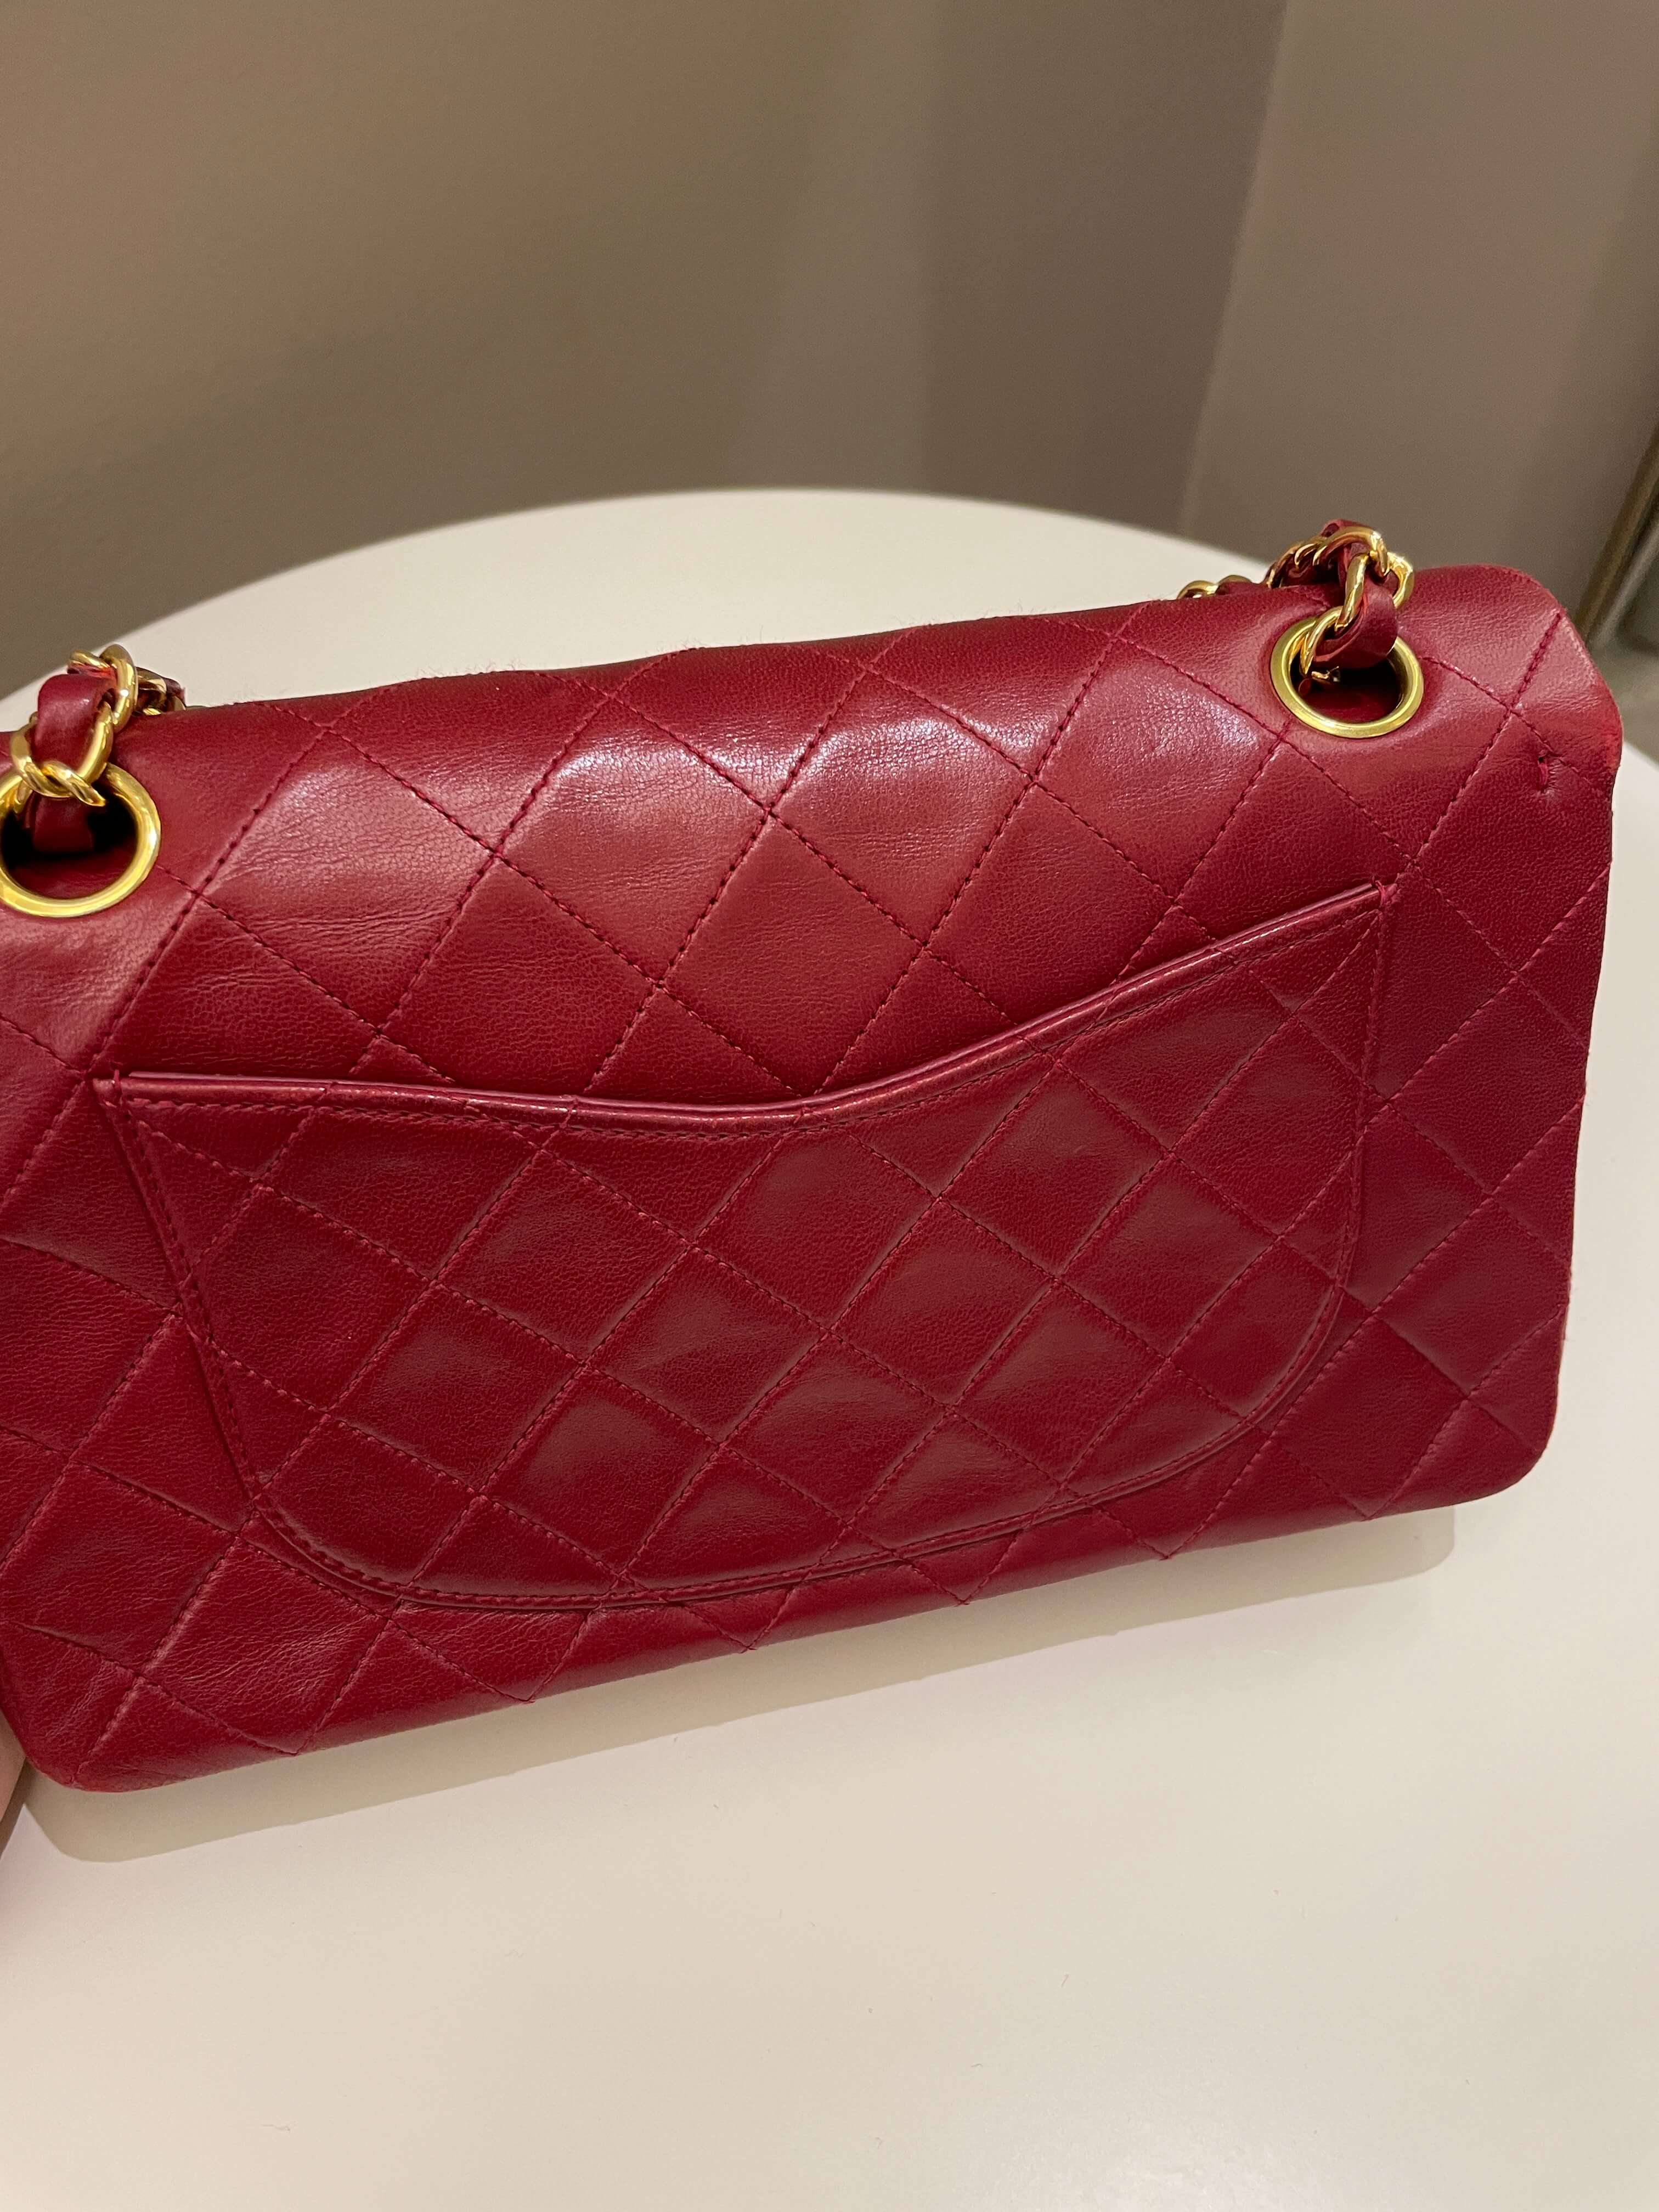 Chanel Vintage Classic Small Double Flap Red Lambskin